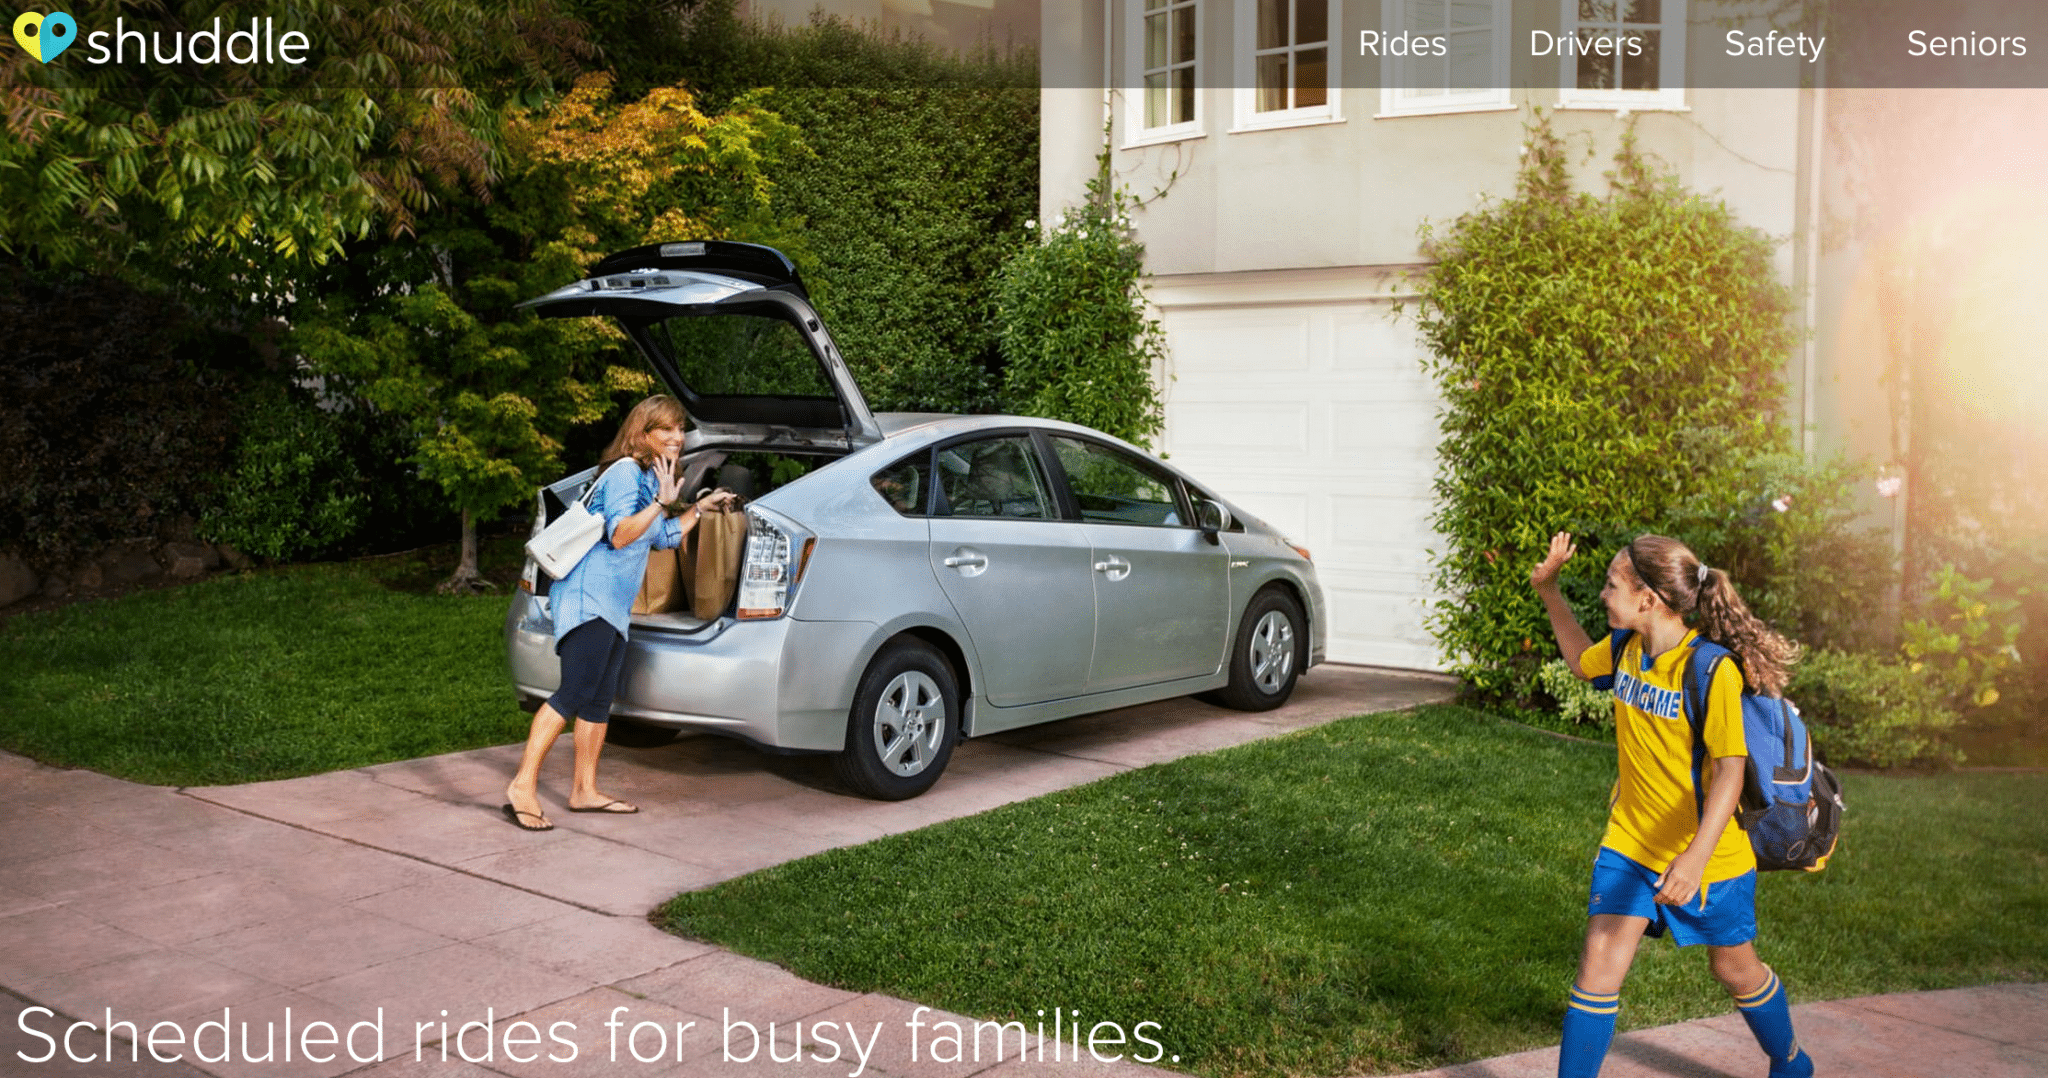 Shuddle is a rideshare app targeting children and seniors.